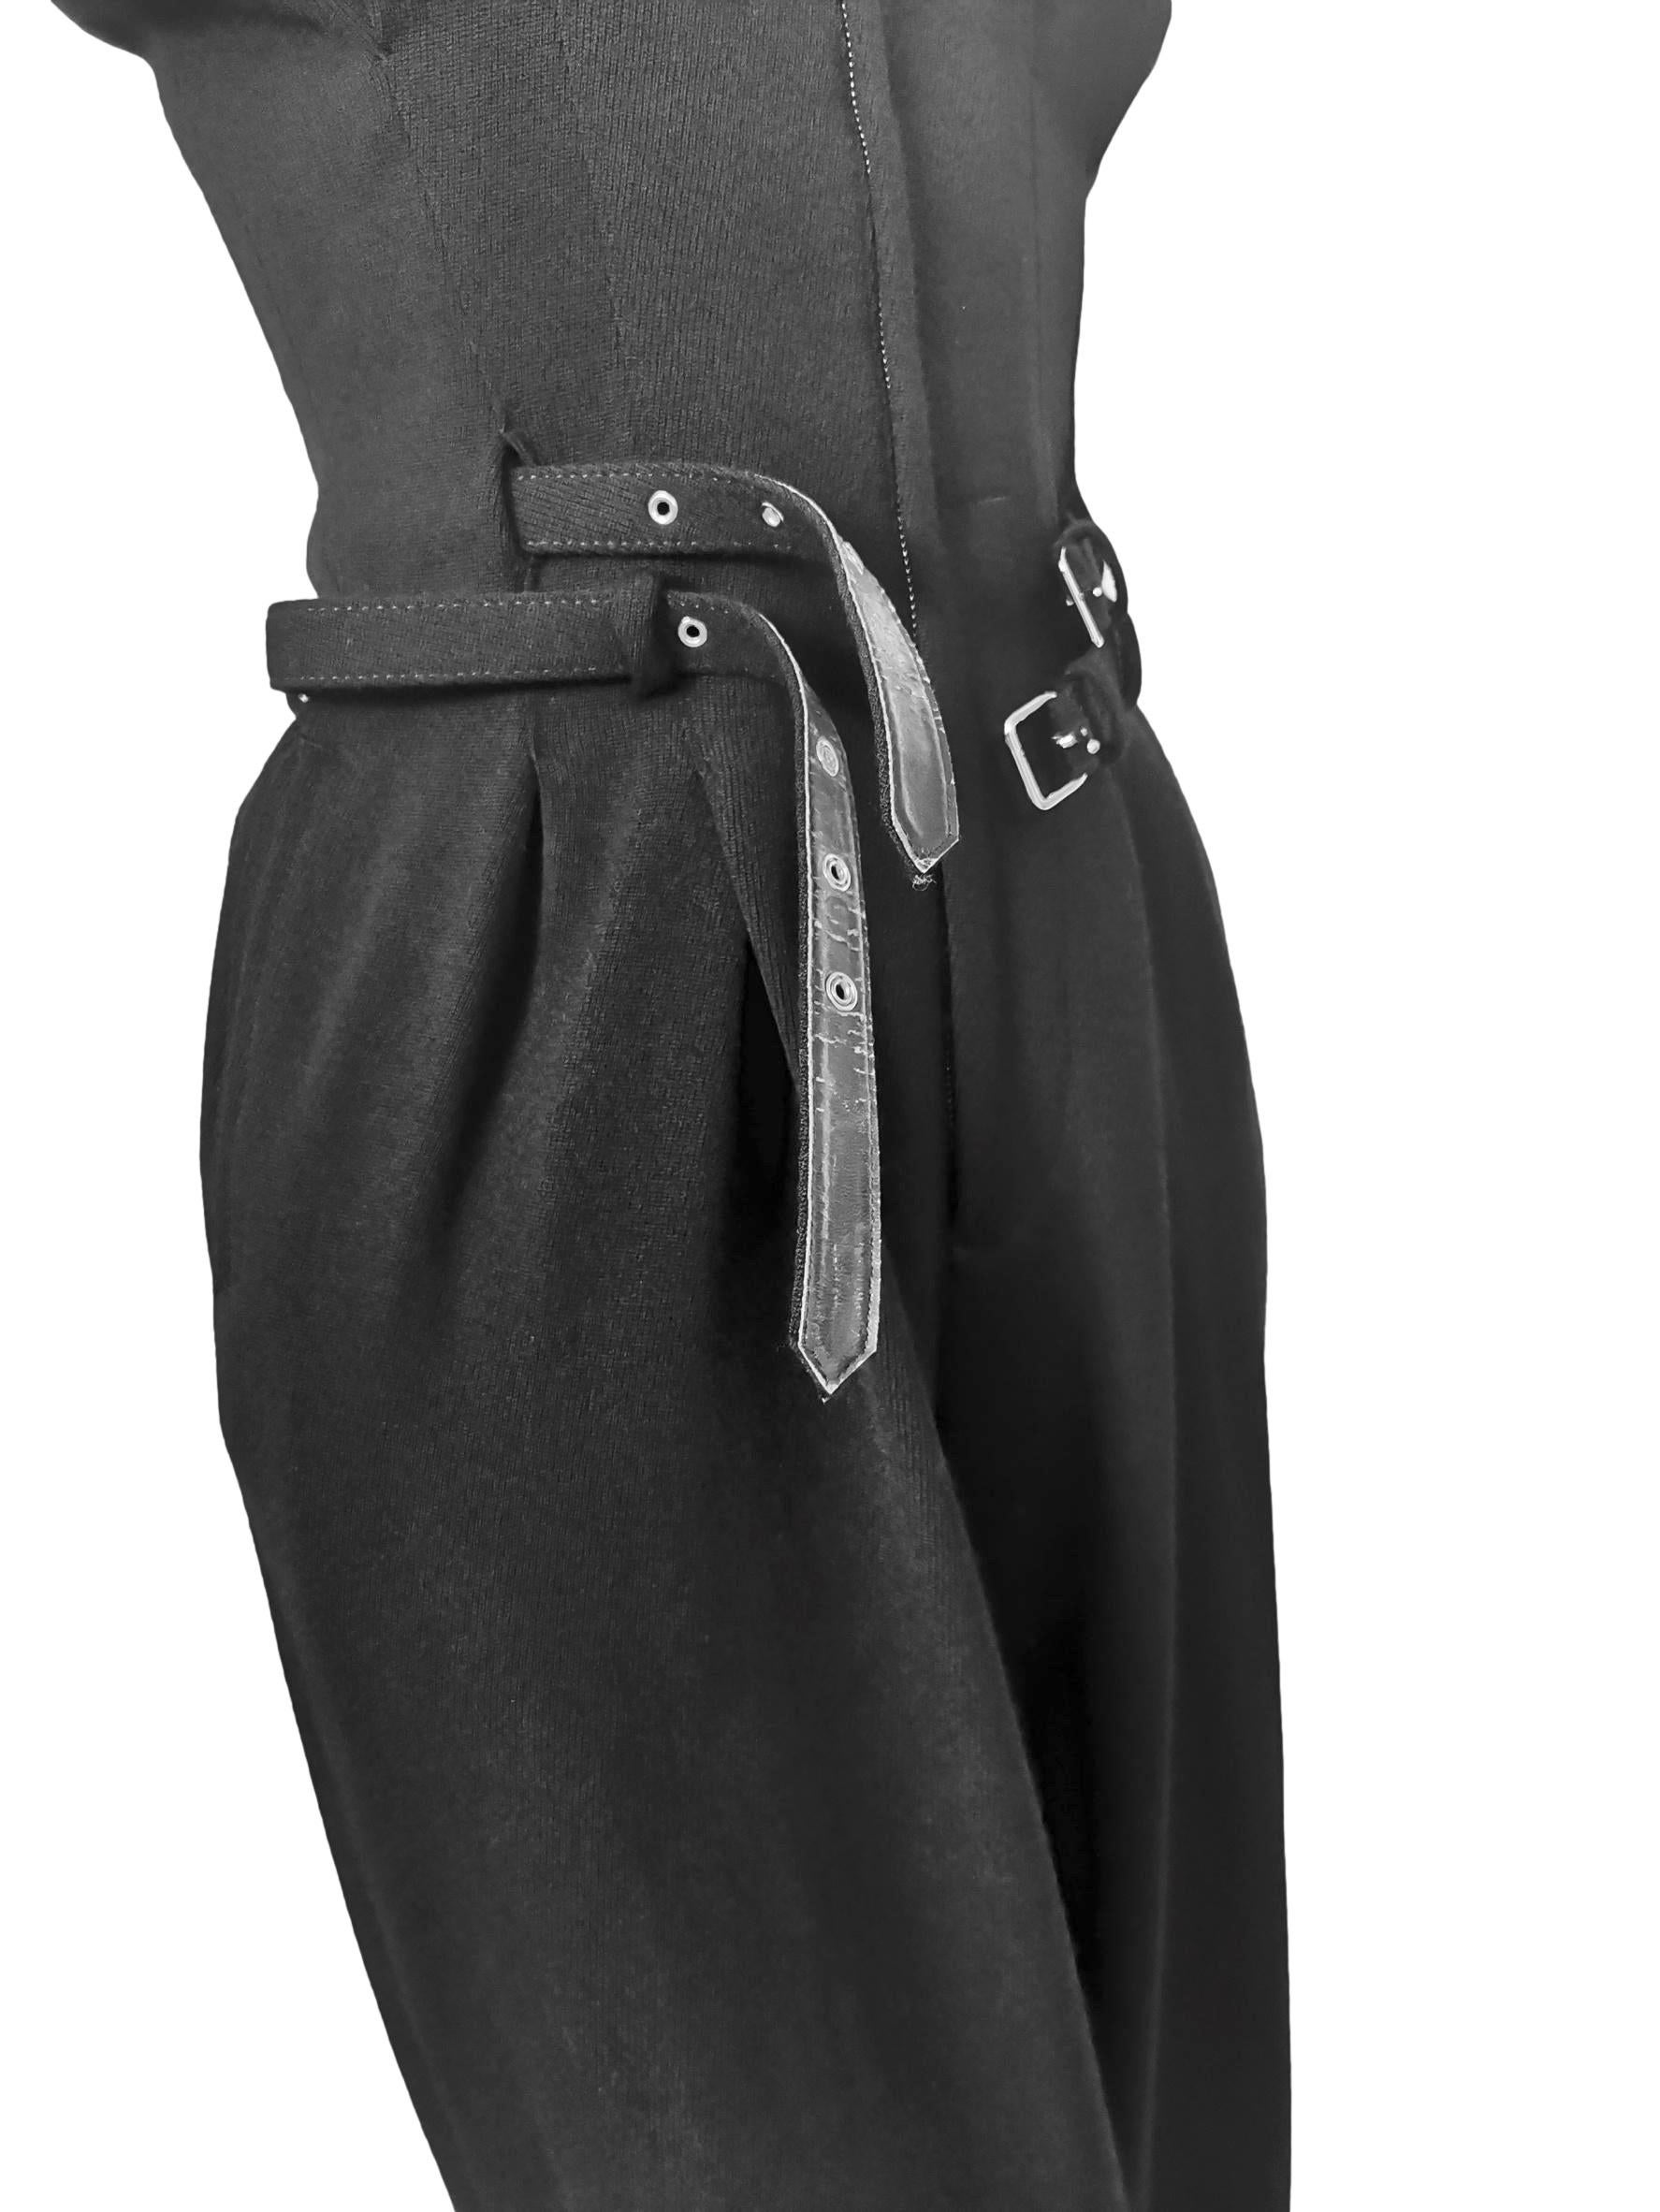 Comme des Garcons Wool Double Belted Jumpsuit AD 1989 For Sale 12